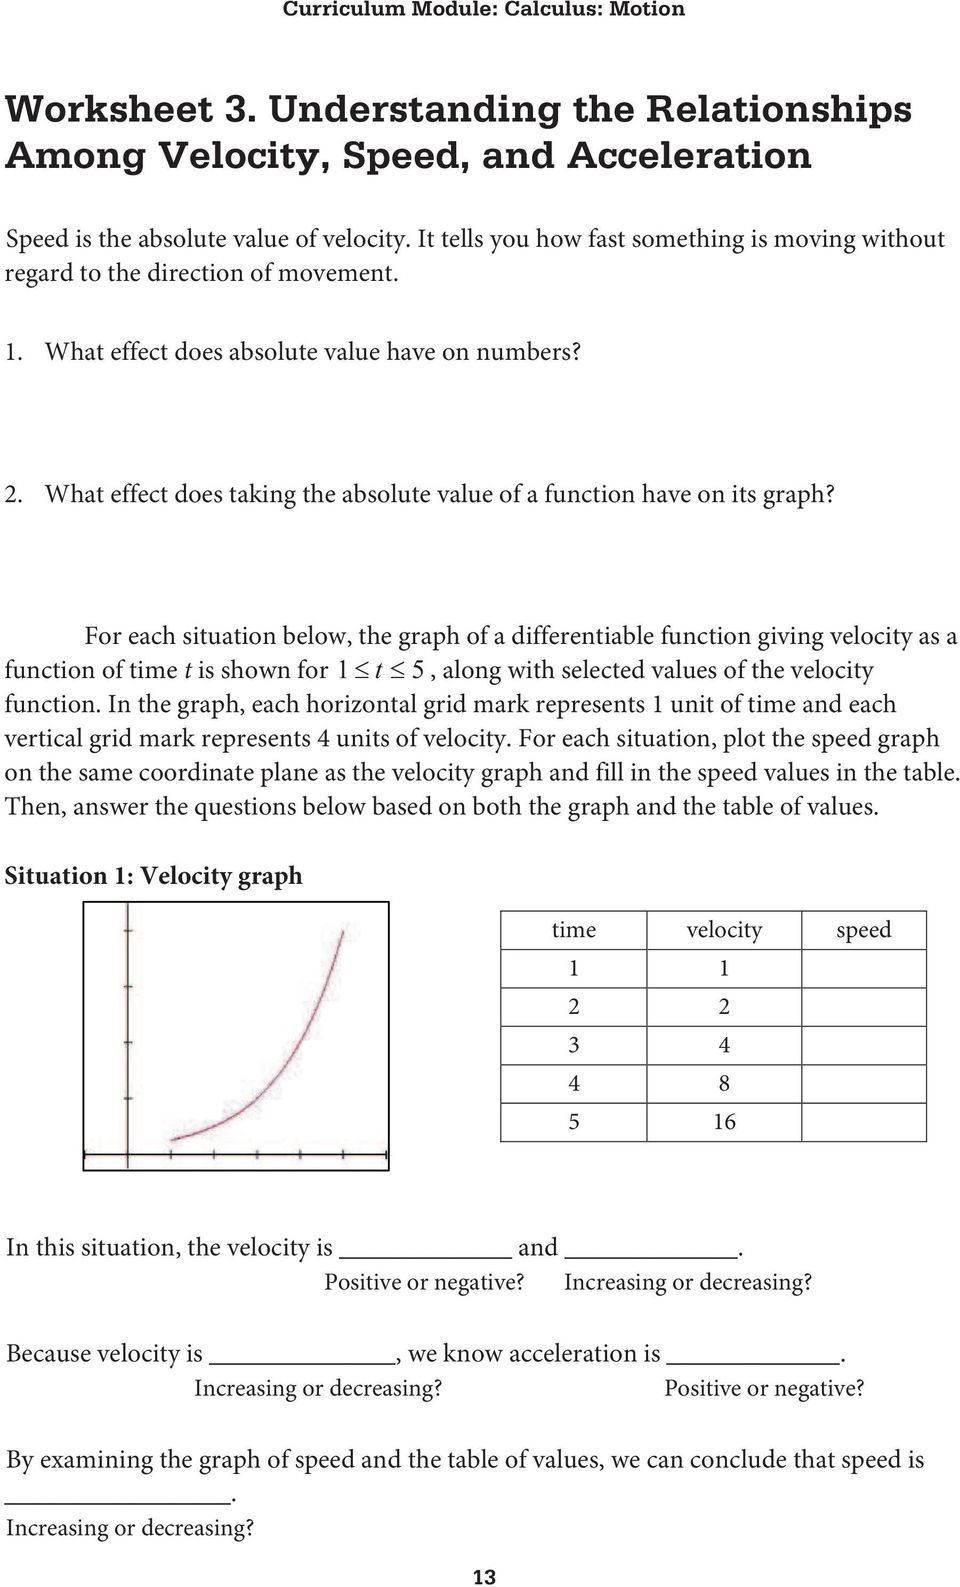 What effect does taking the absolute value of a function have on its graph?